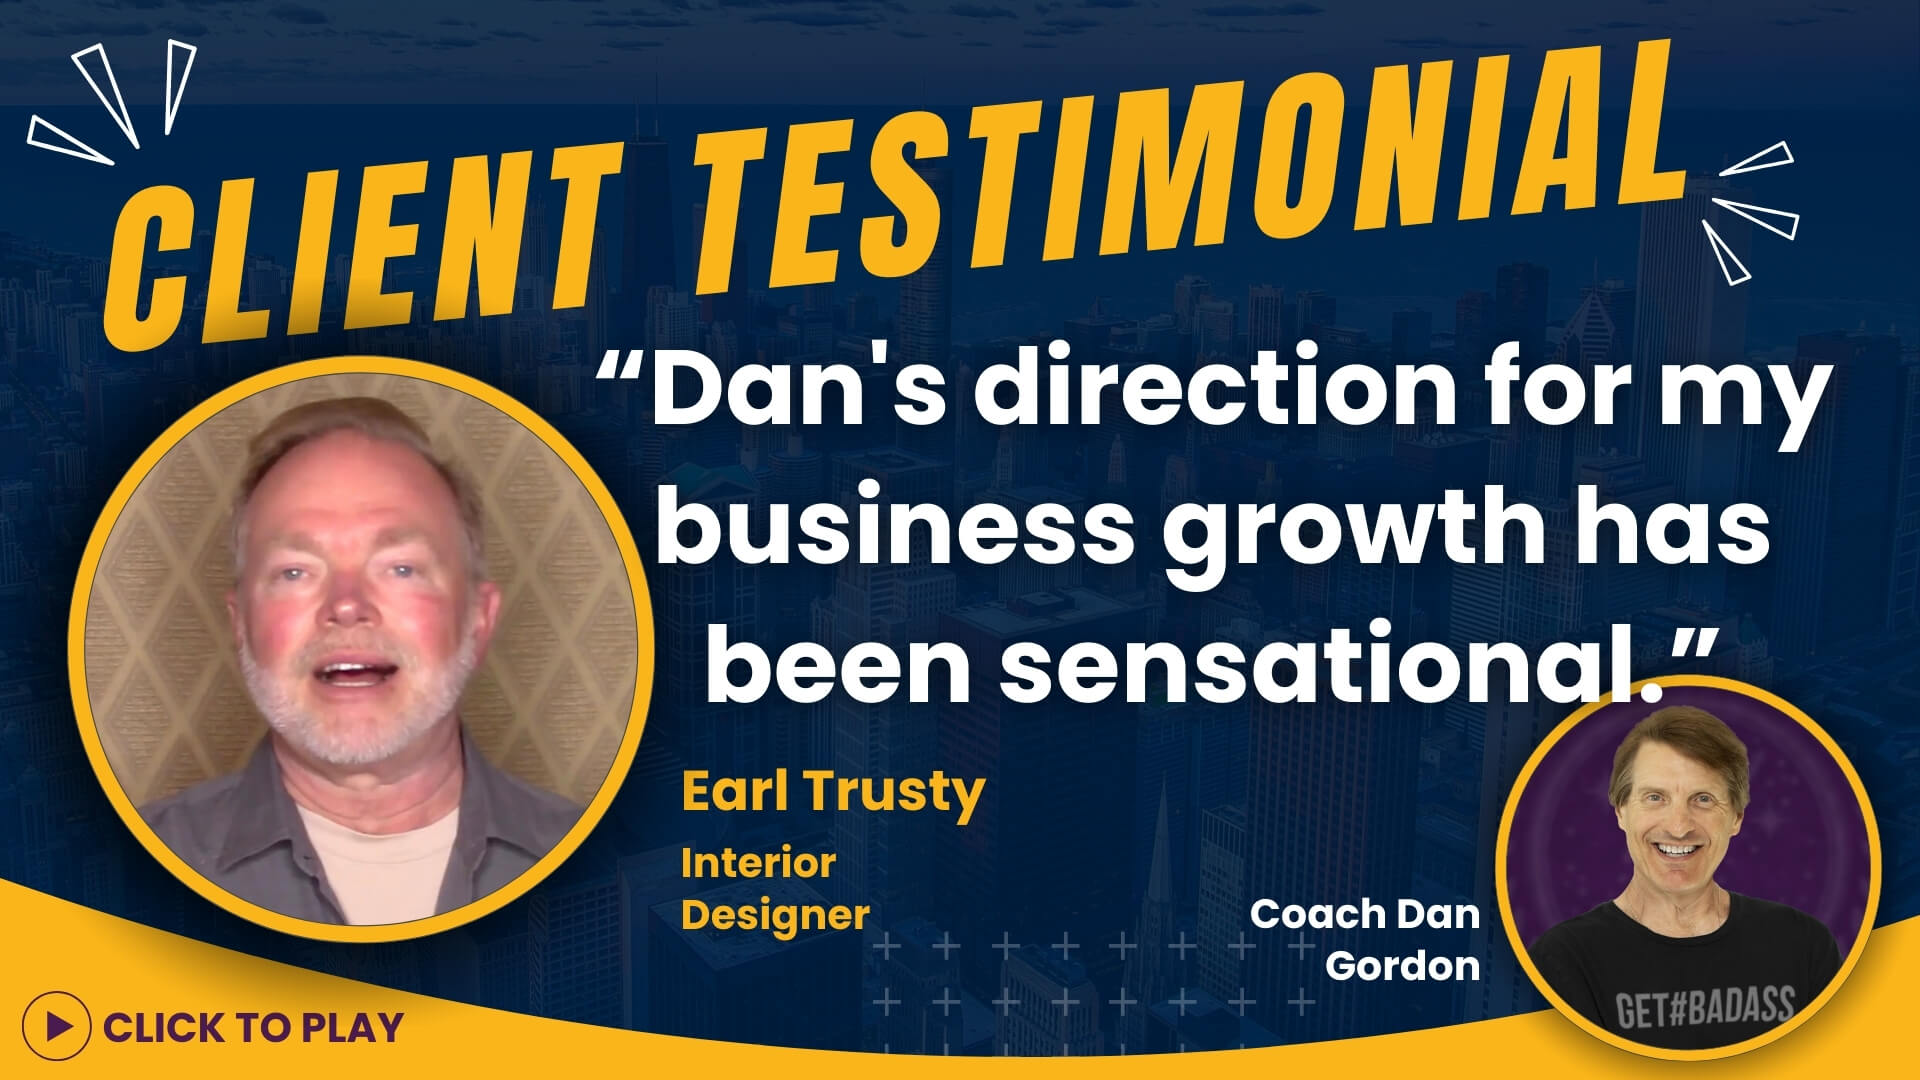 Interior Designer Earl Trusty provides a testimonial expressing how Coach Dan Gordon's direction sensationalized his business growth, including a 'Click to Play' feature.